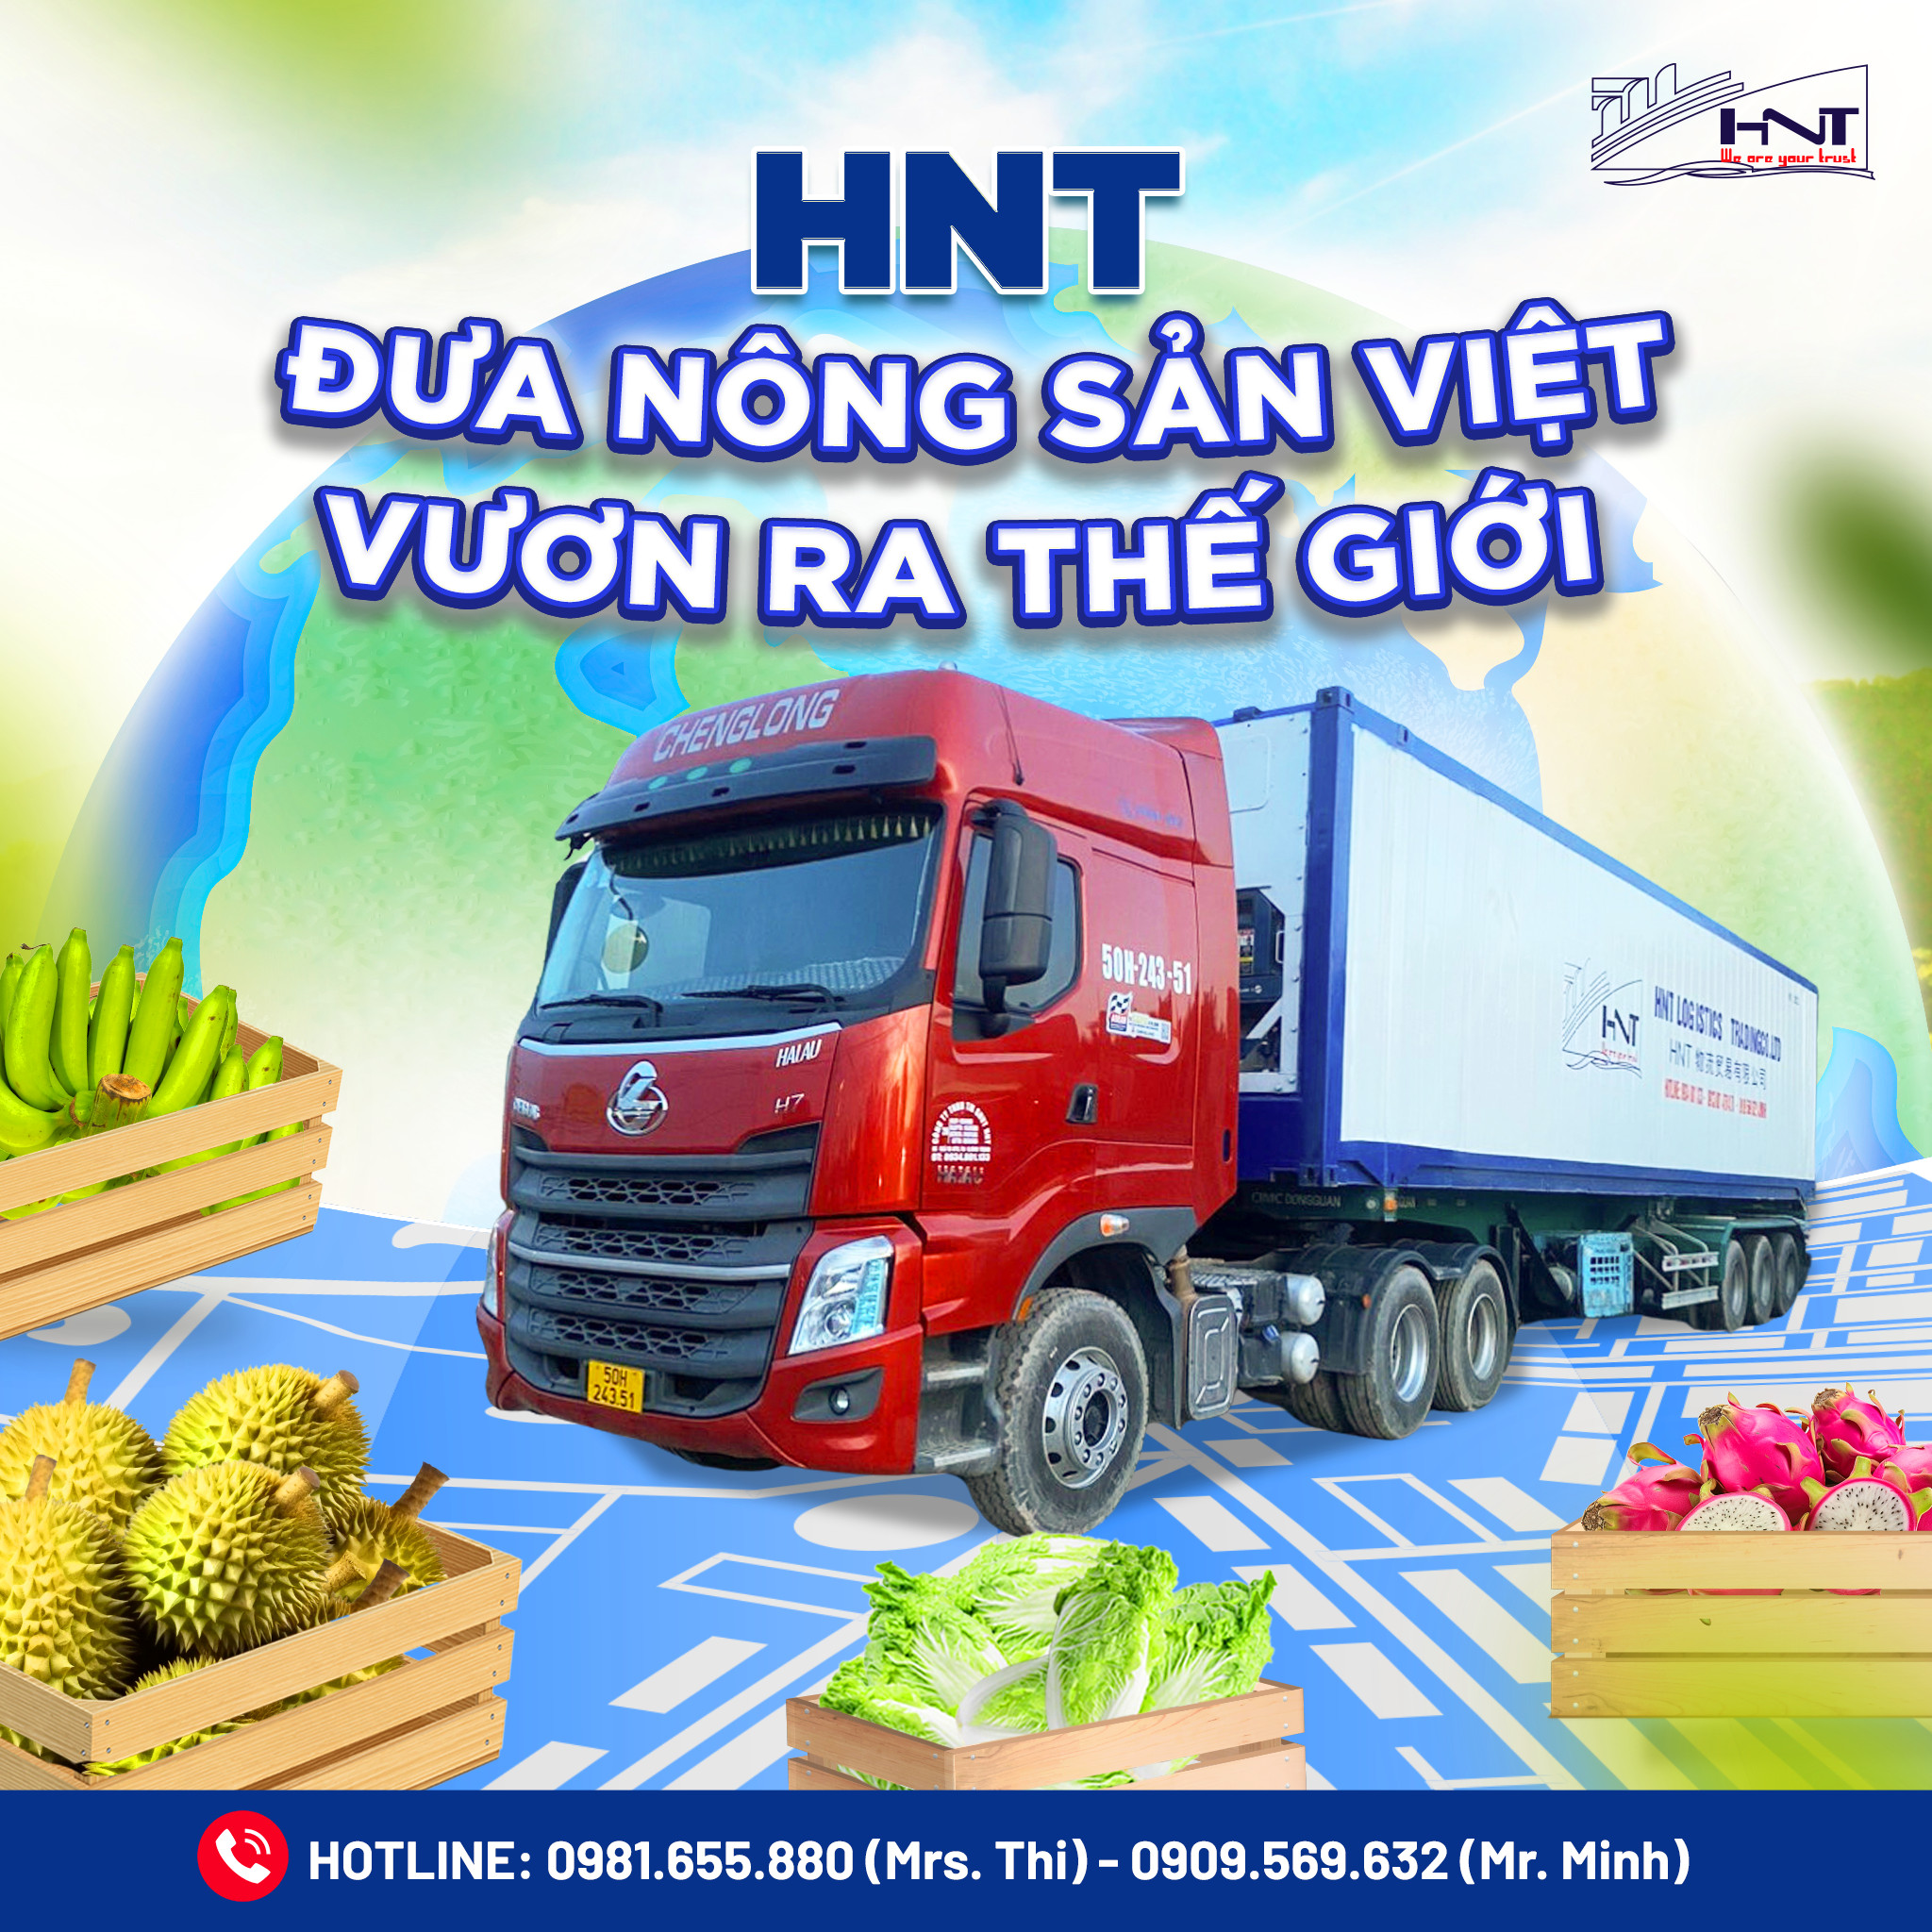 HNT Logistics are the shipping process and export strict.